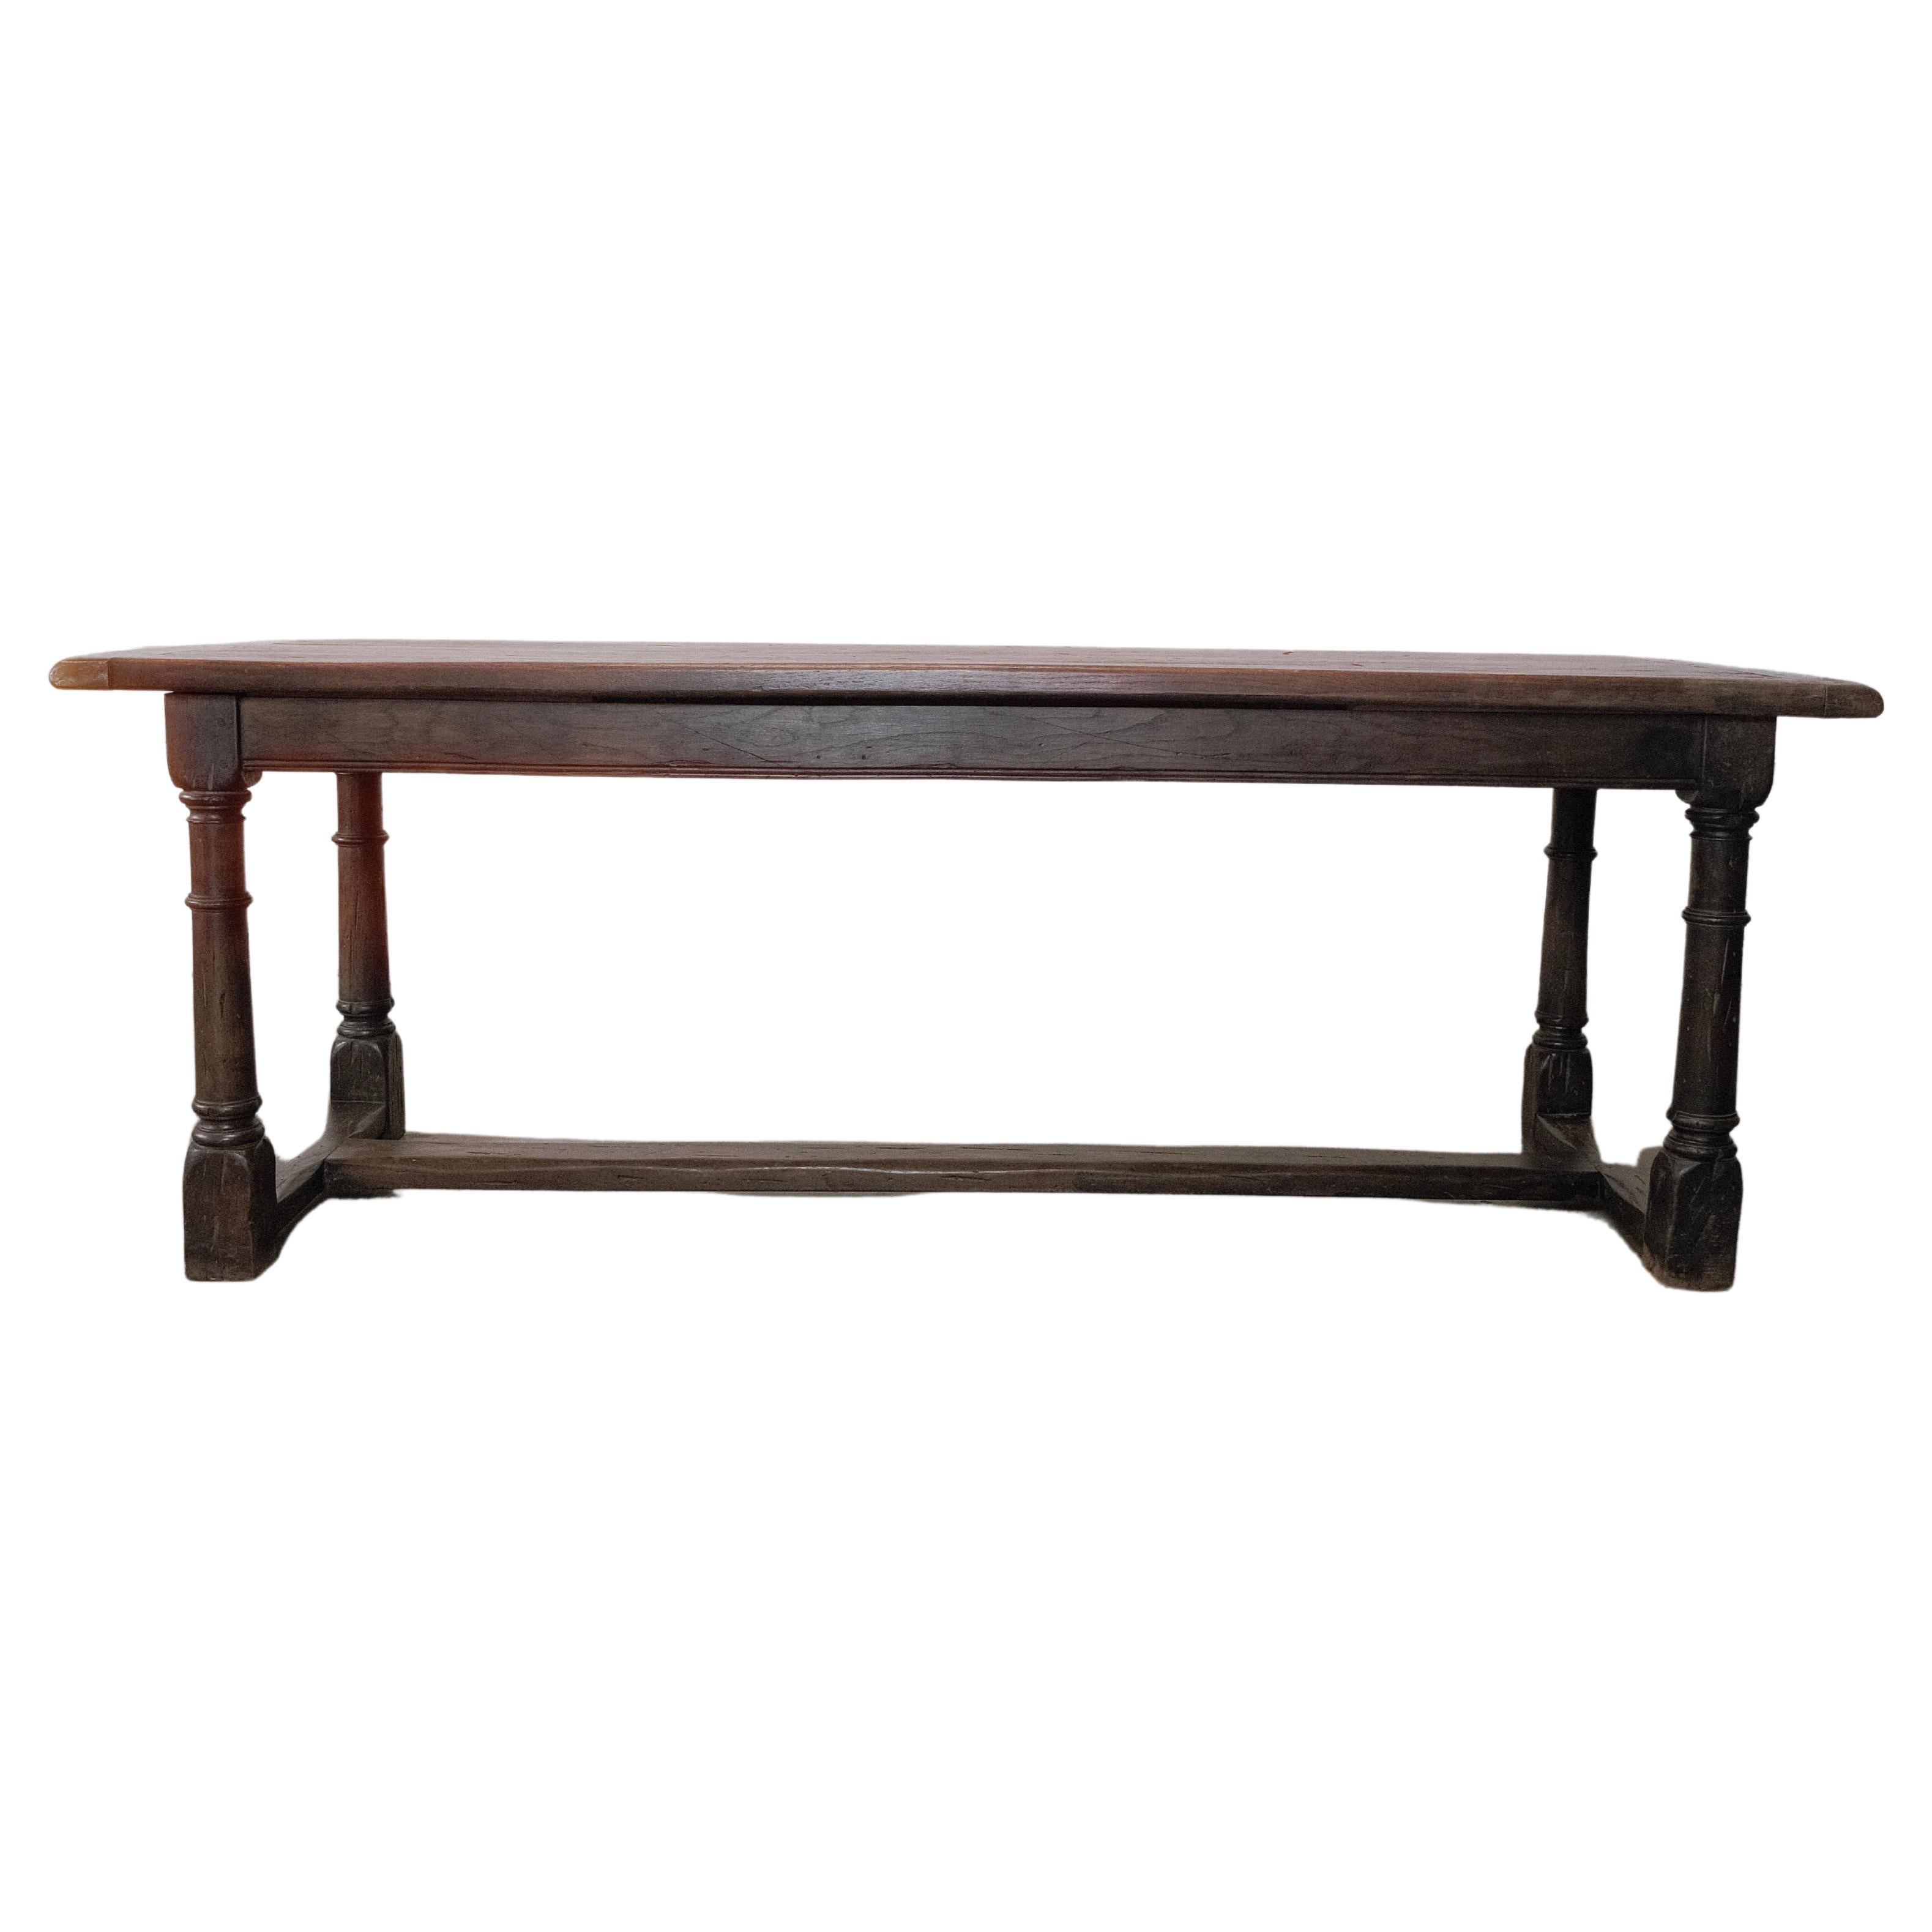 19th Century Solid Oak French LOUIS PHILIPPE Farm Table